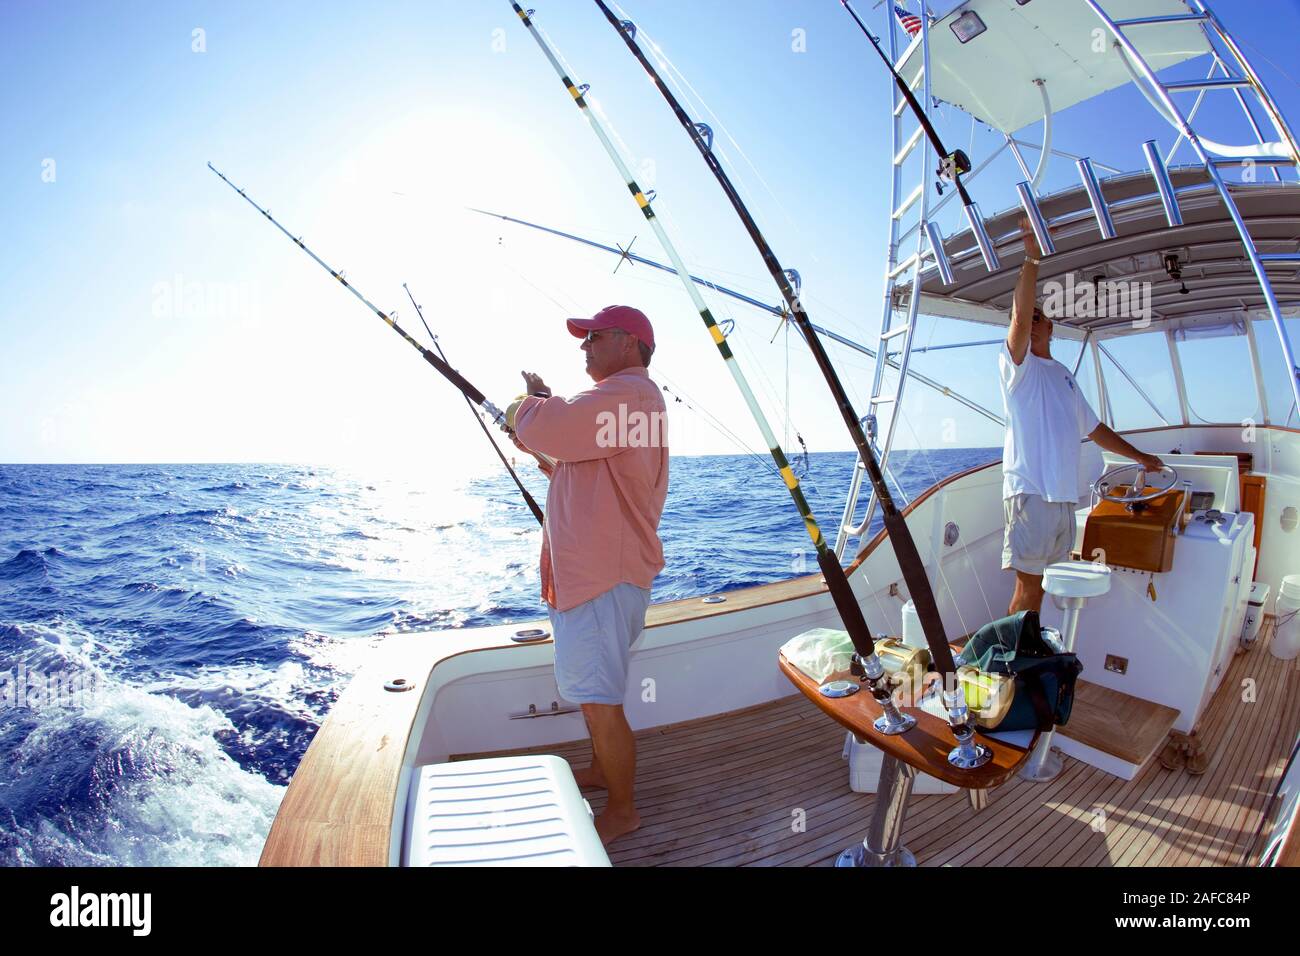 Man fishing off the stern of sport fishing boat in Key West, Florida, USA. Model Released. Stock Photo